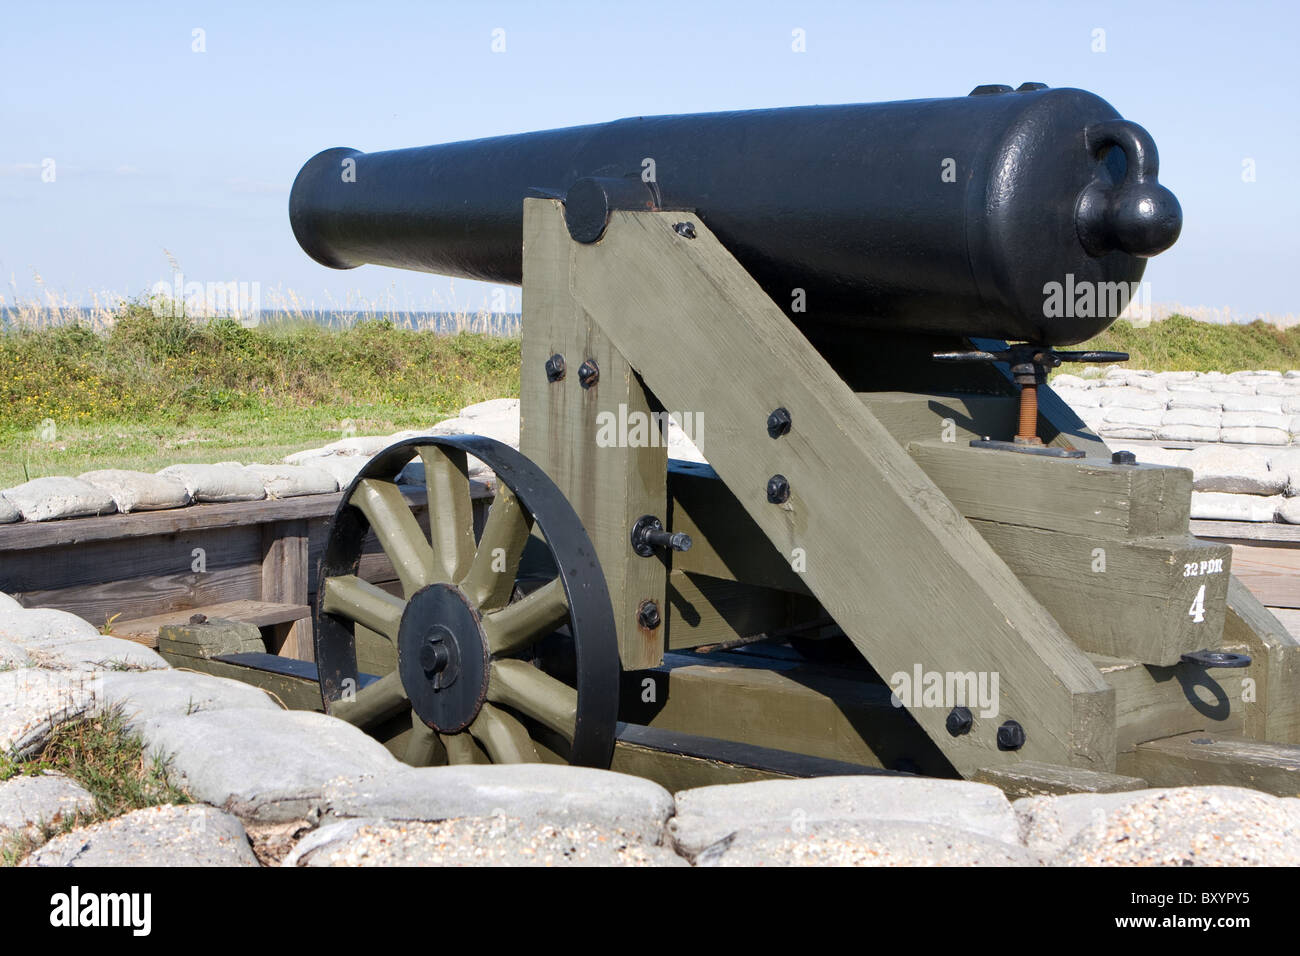 Smoothbore muzzles-loading cannon used during the United States Civil War. Stock Photo